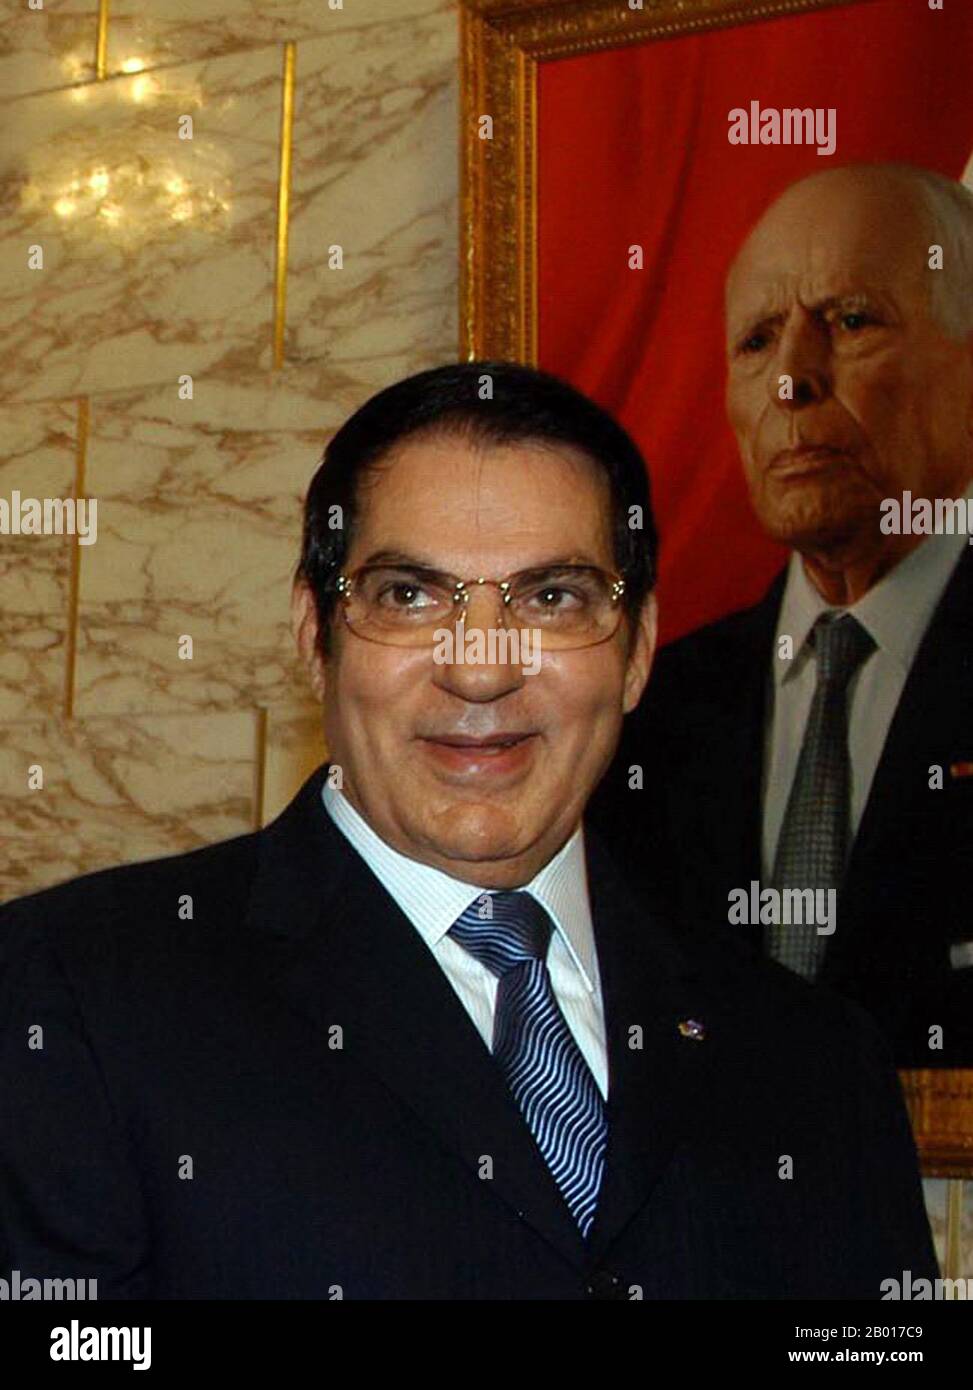 Tunisia: Zine El Abidine Ben Ali, President of Tunisia (r. 1987-2011), in front of a portrait of former President Habib Bourguiba, November 2008, Presidencia de la Nacion Argentina (CC BY-2.0 License).  Zine El Abidine Ben Ali (3 September 1936 - 19 September 2019) was the second President of the Tunisian Republic. He held the office from 7 November 1987, until he was forced to step down and flee the country on 14 January 2011. Ben Ali was appointed Prime Minister in October 1987, and assumed the Presidency in November 1987 in a bloodless coup d'état from then President Habib Bourguiba. Stock Photo